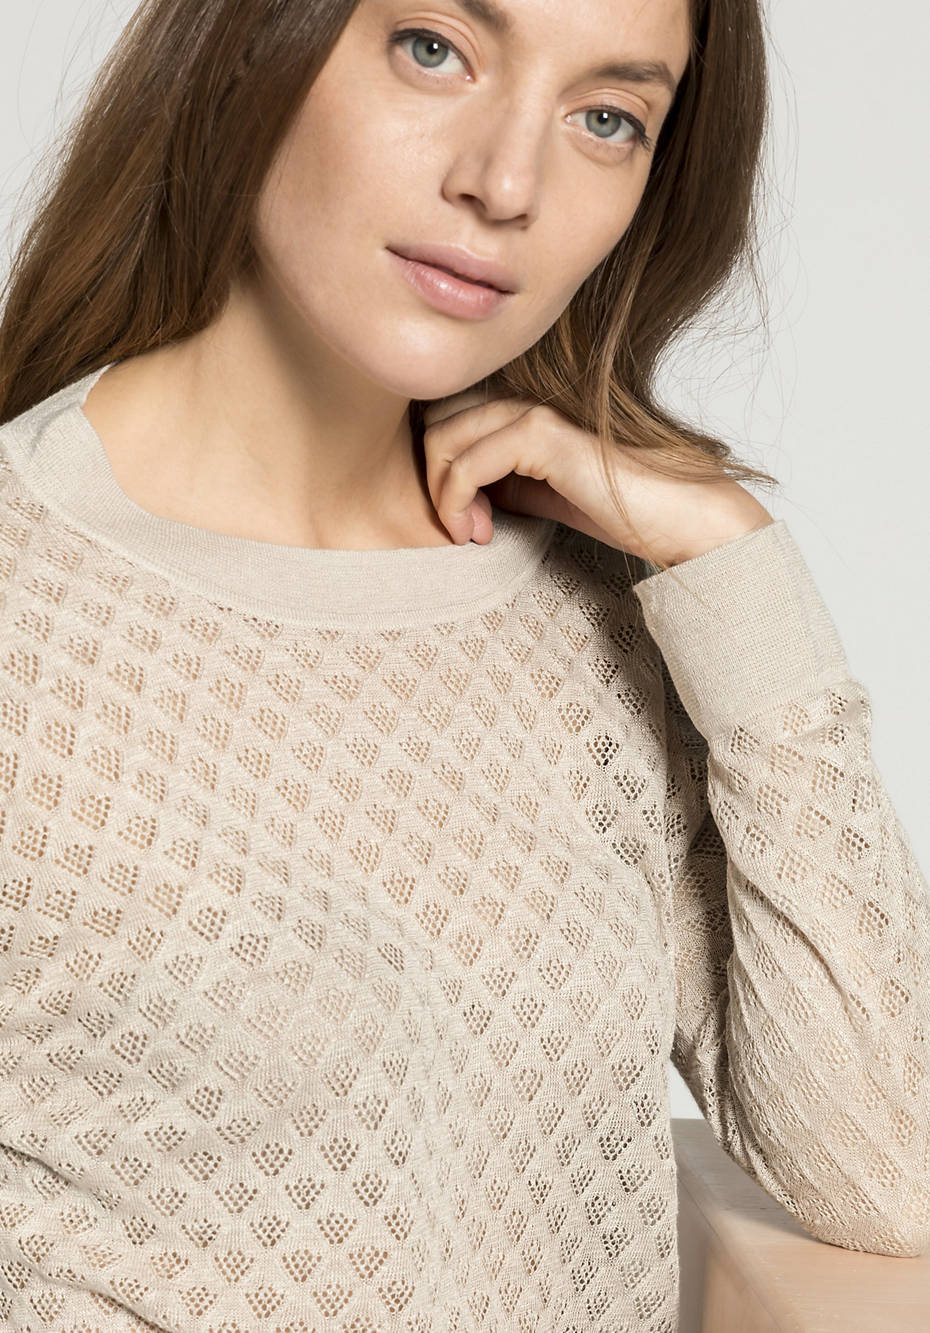 Ajour sweater made of linen with silk